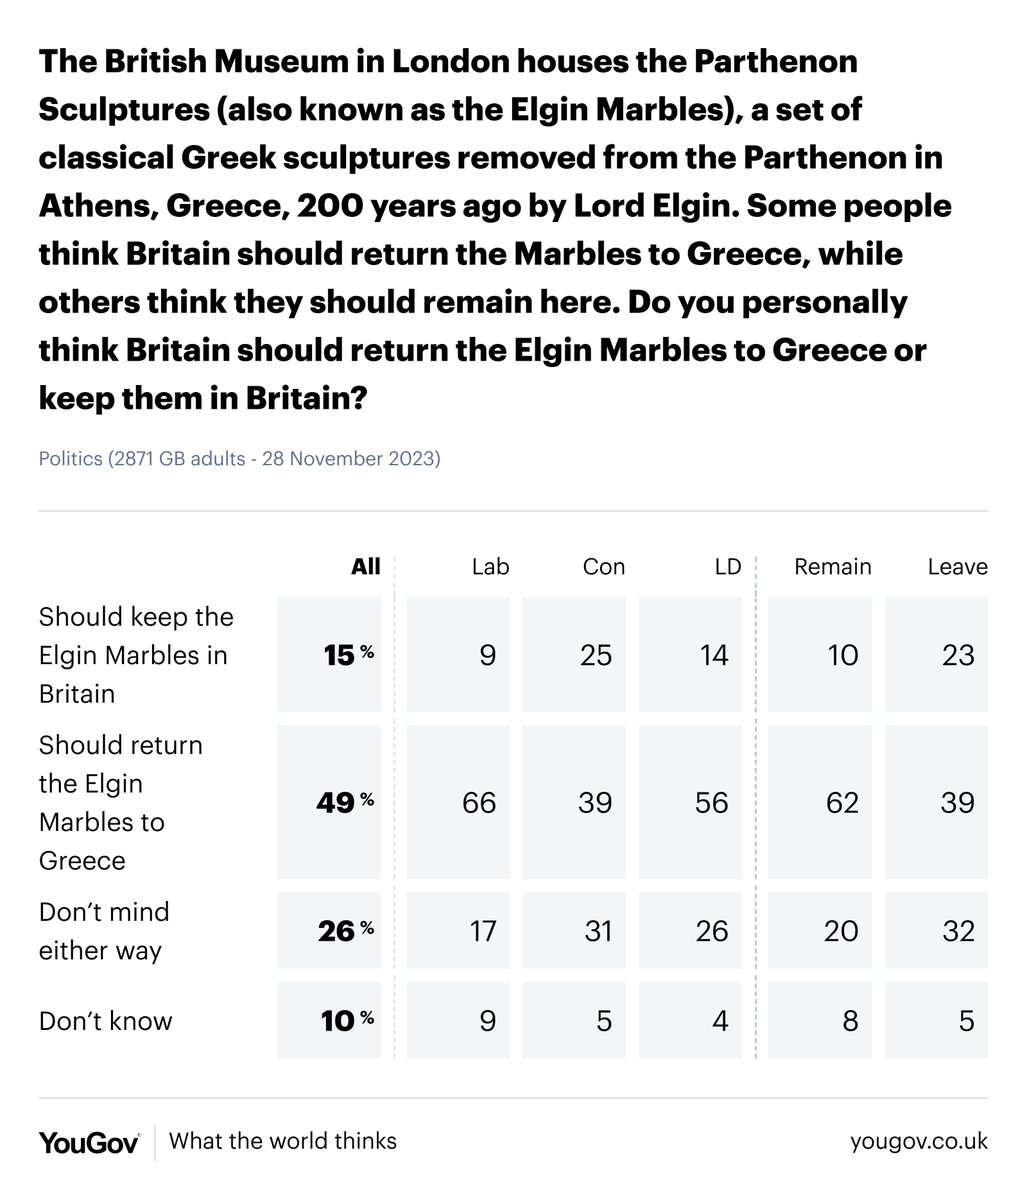 Where do Britons think the Parthenon Sculptures / Elgin Marbles should be kept? In Britain: 15% In Greece: 49% Don't mind either way: 26% yougov.co.uk/topics/enterta…